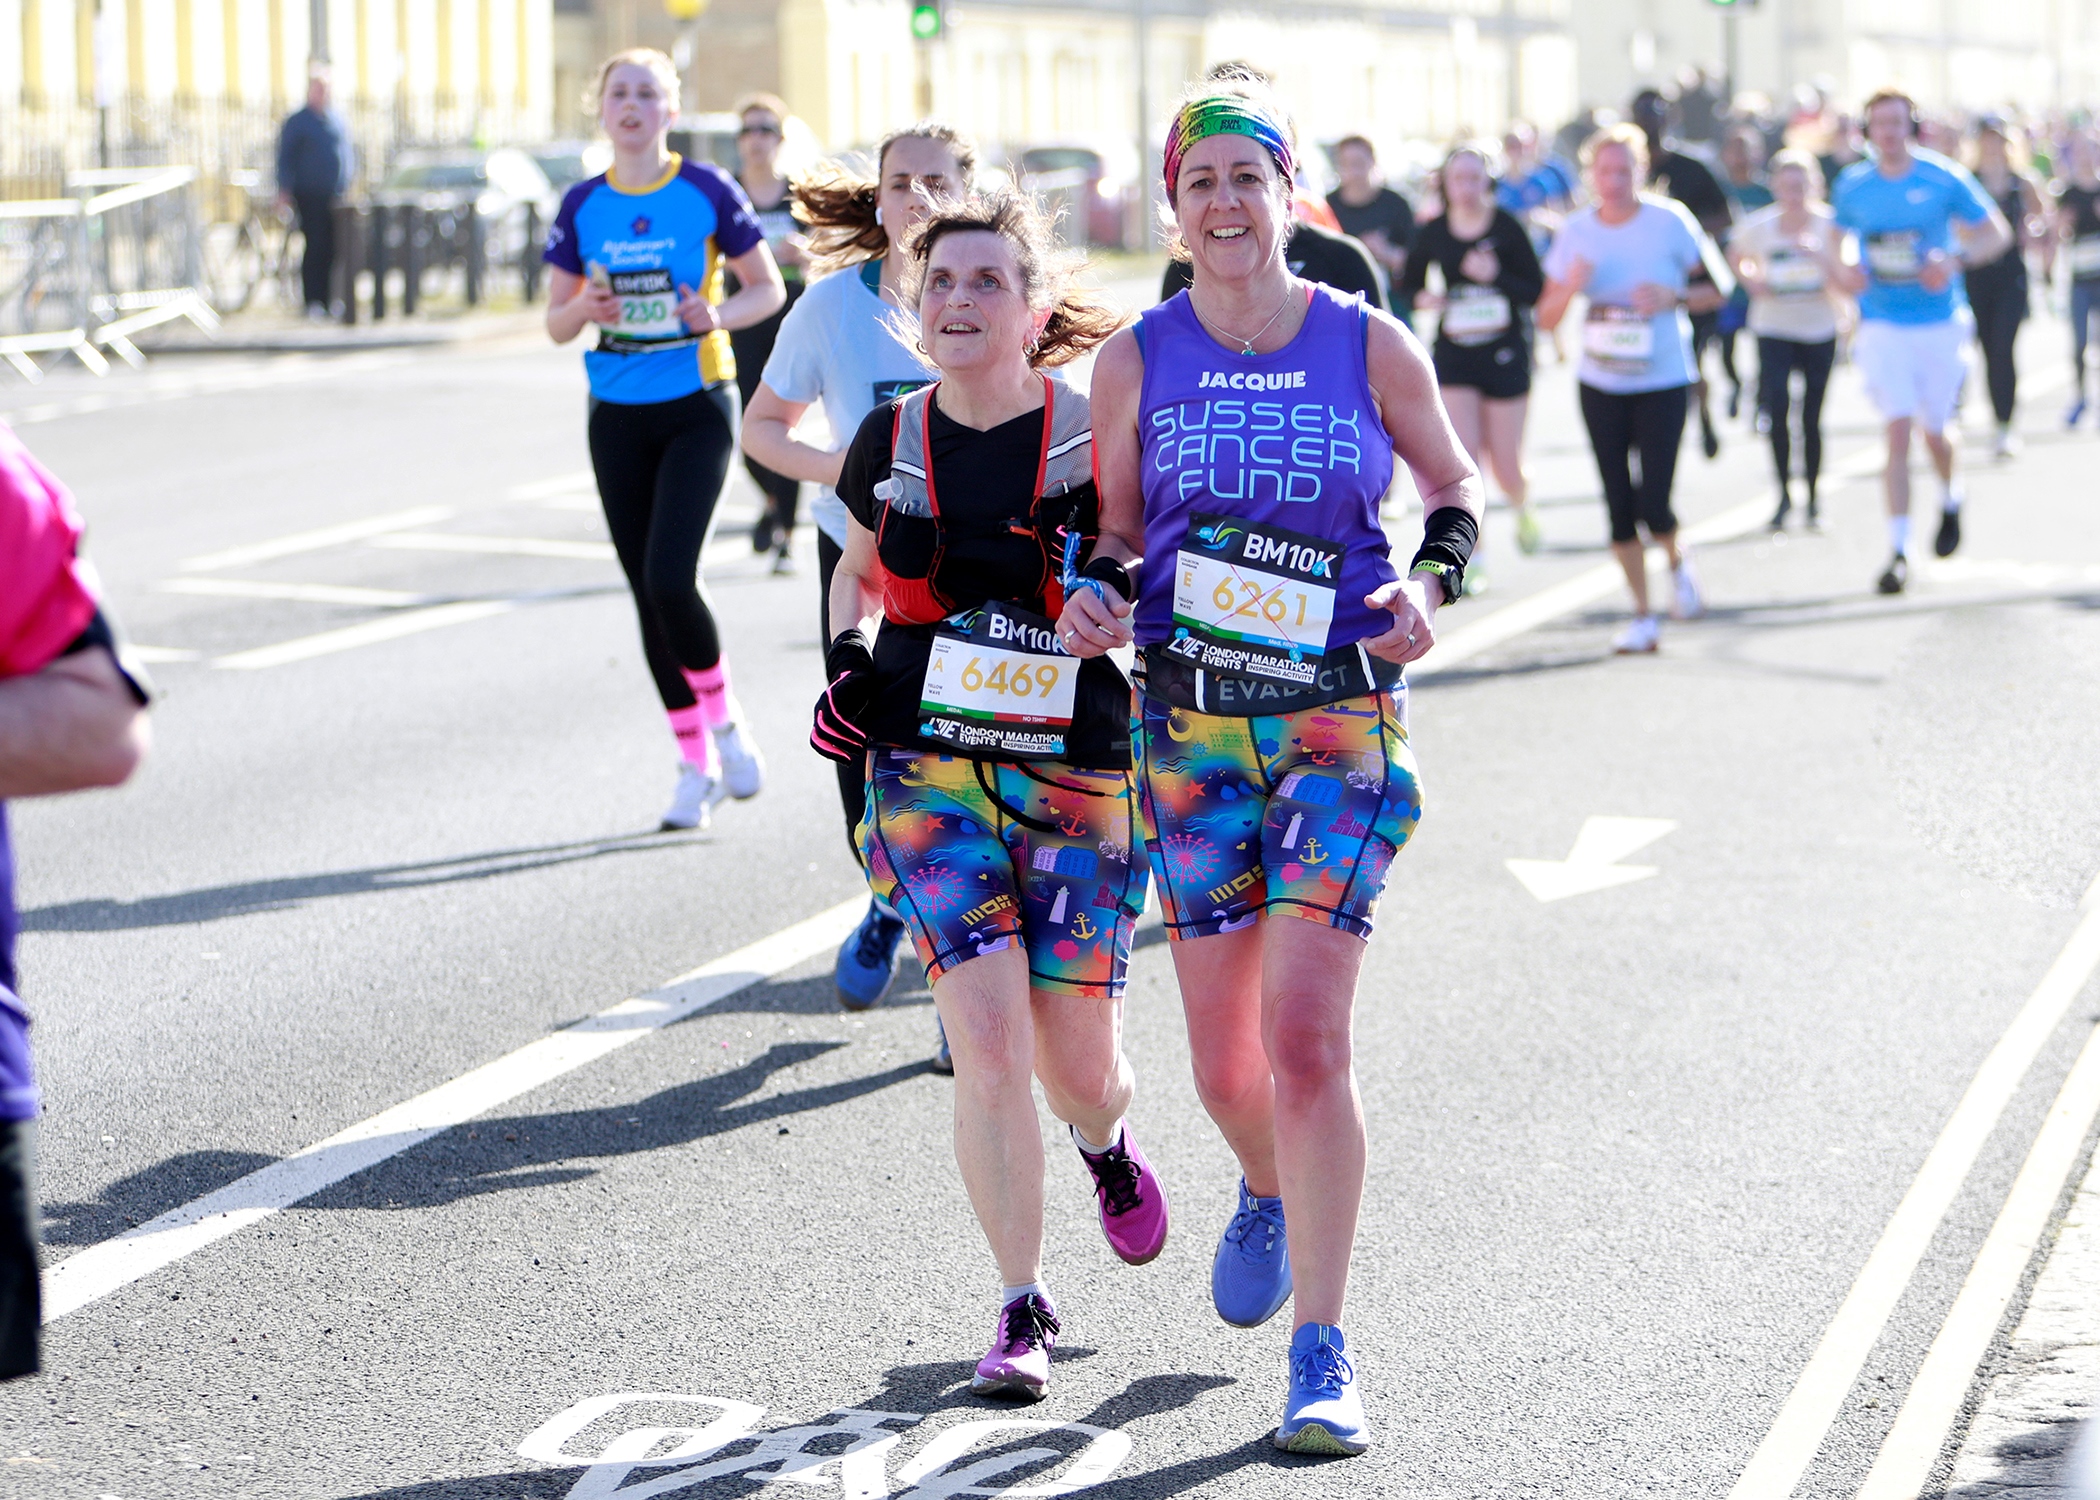 Alison Evans, East Sussex SLC member, pictured running with a guide runner. She is wearing a race bib, and is pictured running down a main road with other runners shown in the background.